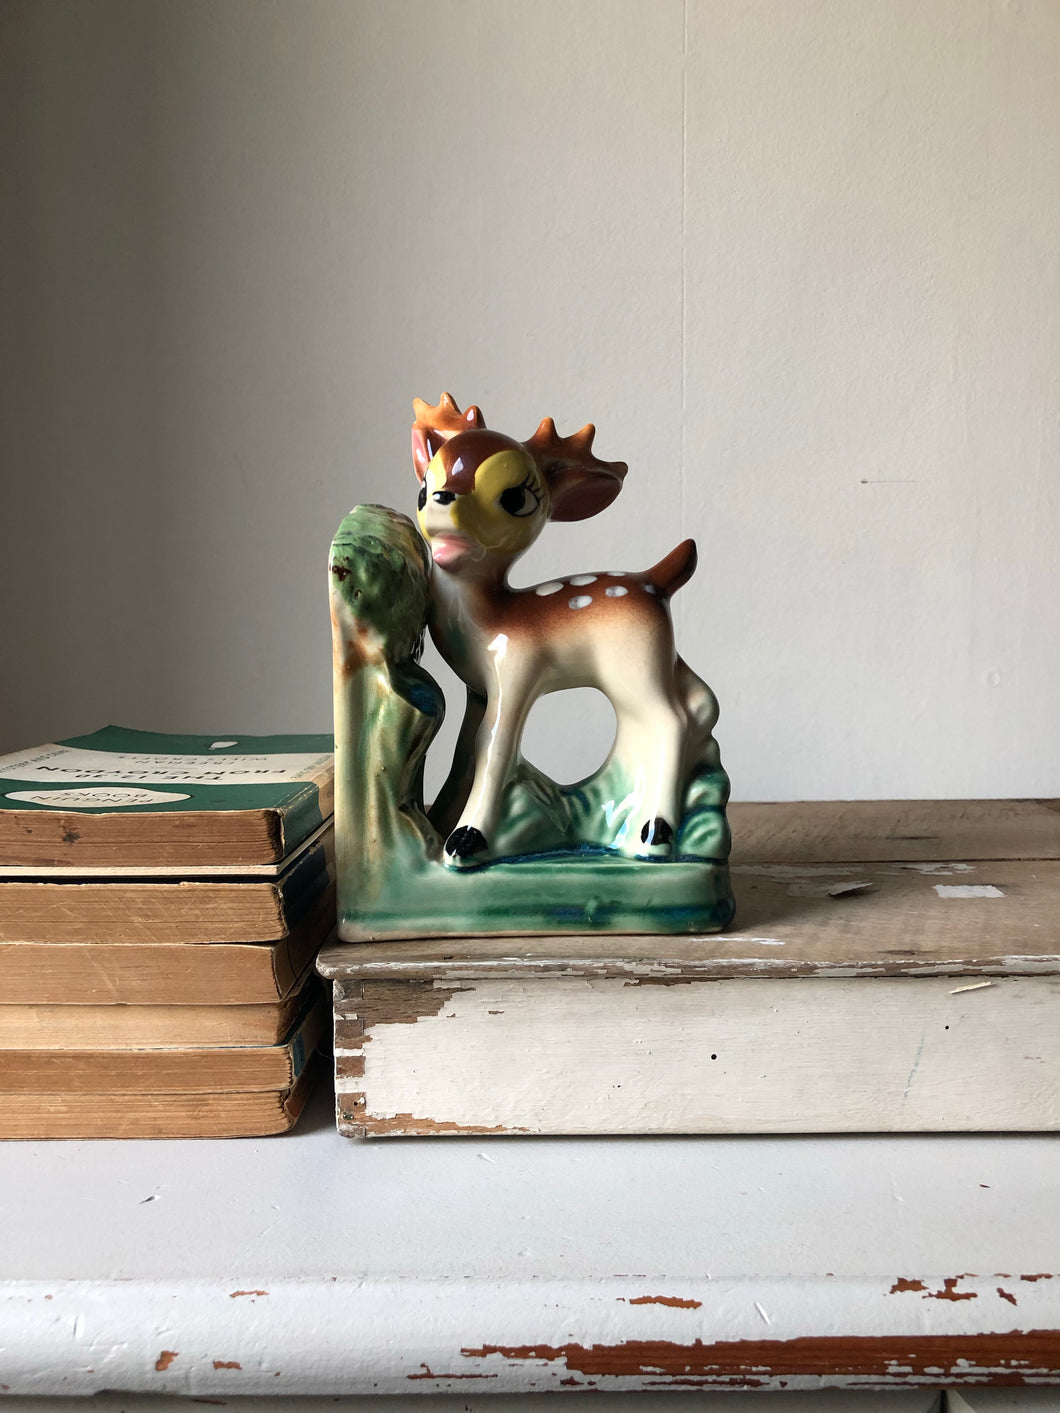 Vintage Bambi style Book End